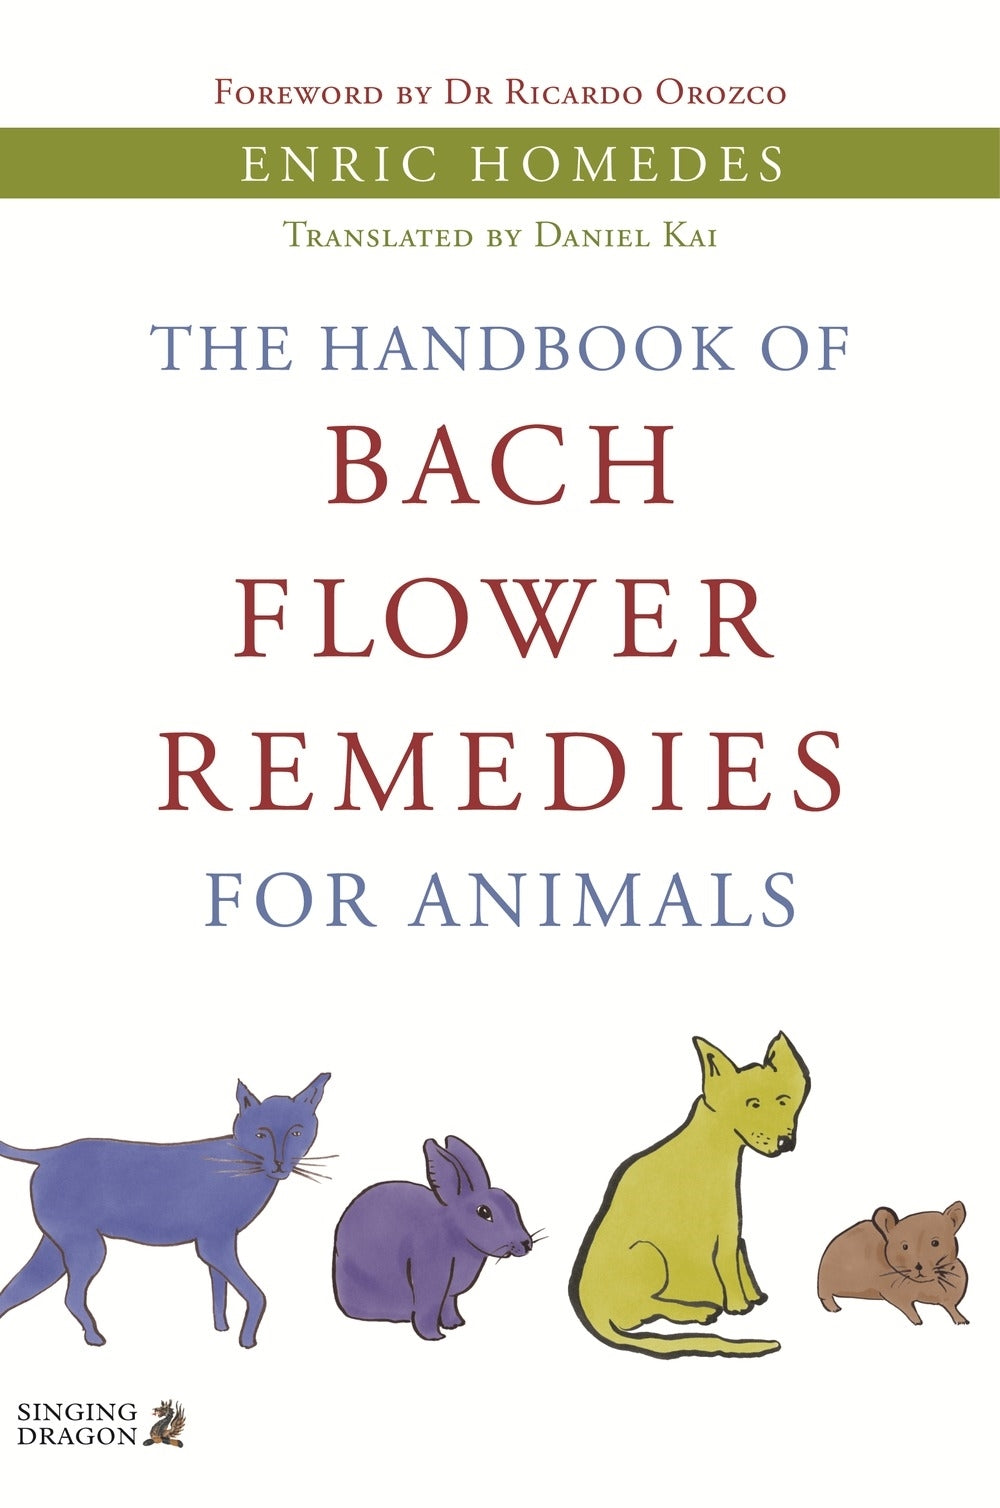 The Handbook of Bach Flower Remedies for Animals by Enric Homedes Homedes Bea, Ricardo Orozco